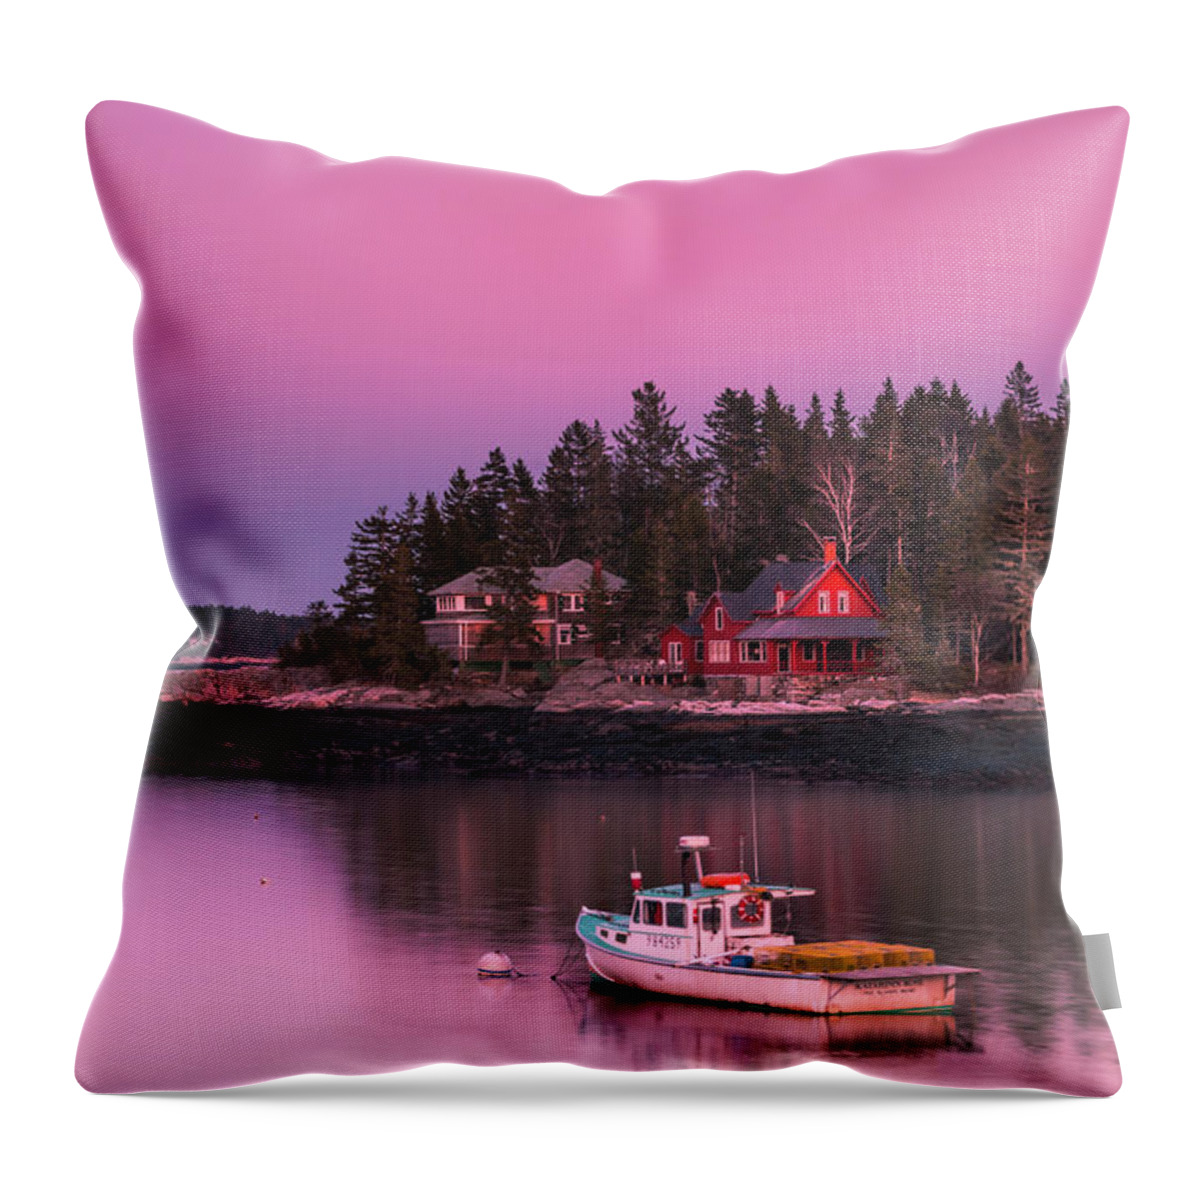 Maine Throw Pillow featuring the photograph Maine Five Islands Coastal Sunset by Ranjay Mitra